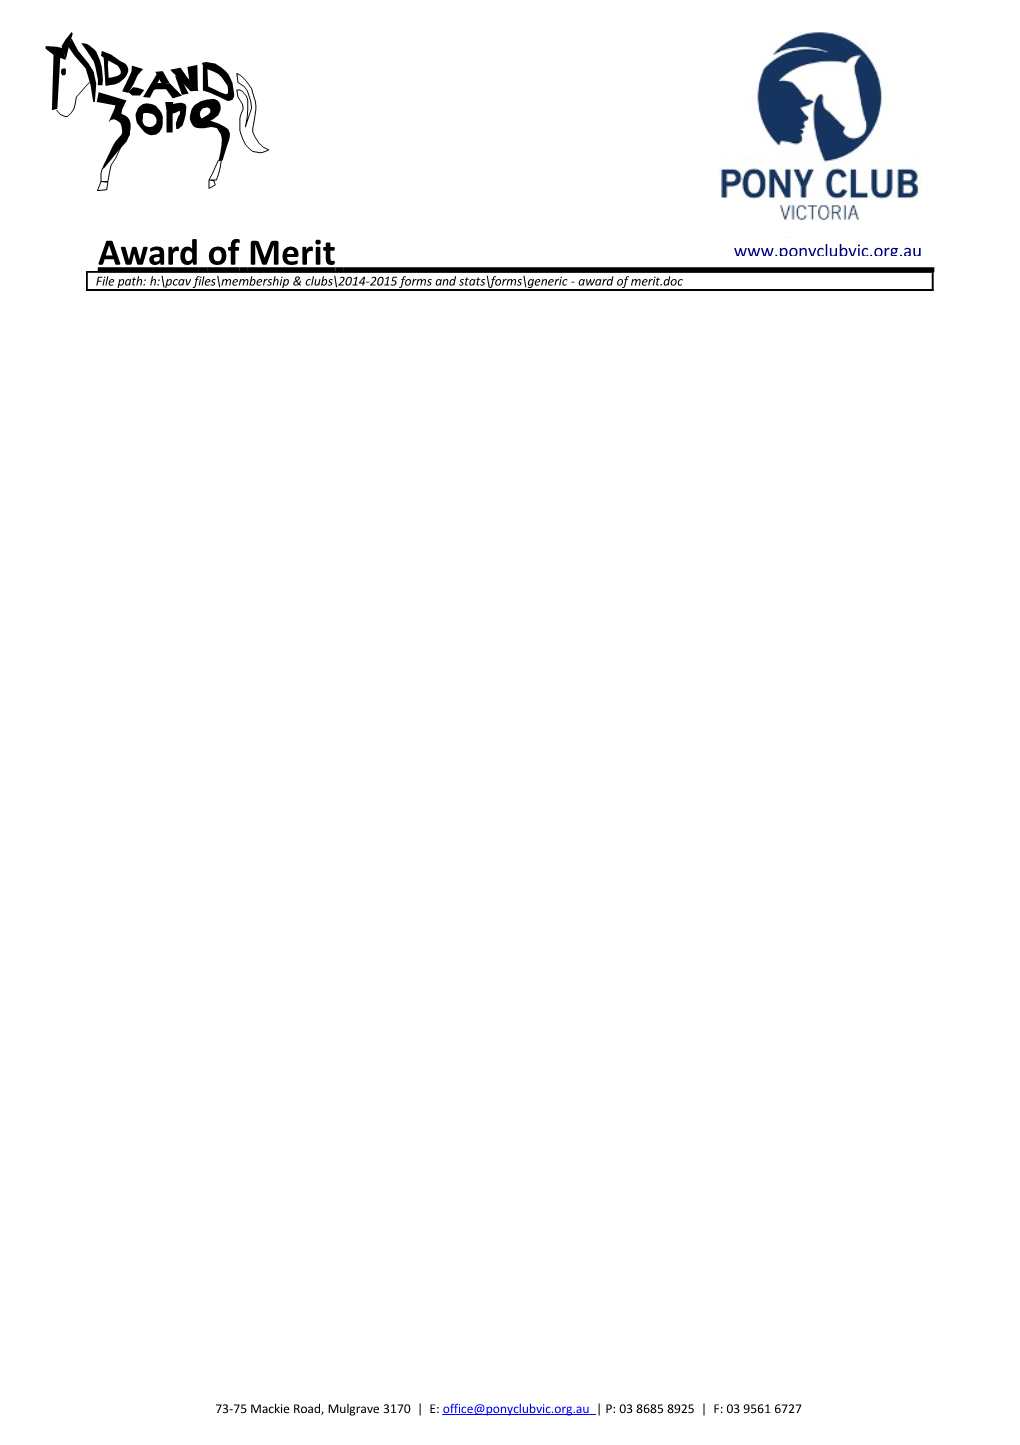 The Award of Merit Is the Highest Honor for Outstanding Service to Pony Club Performed